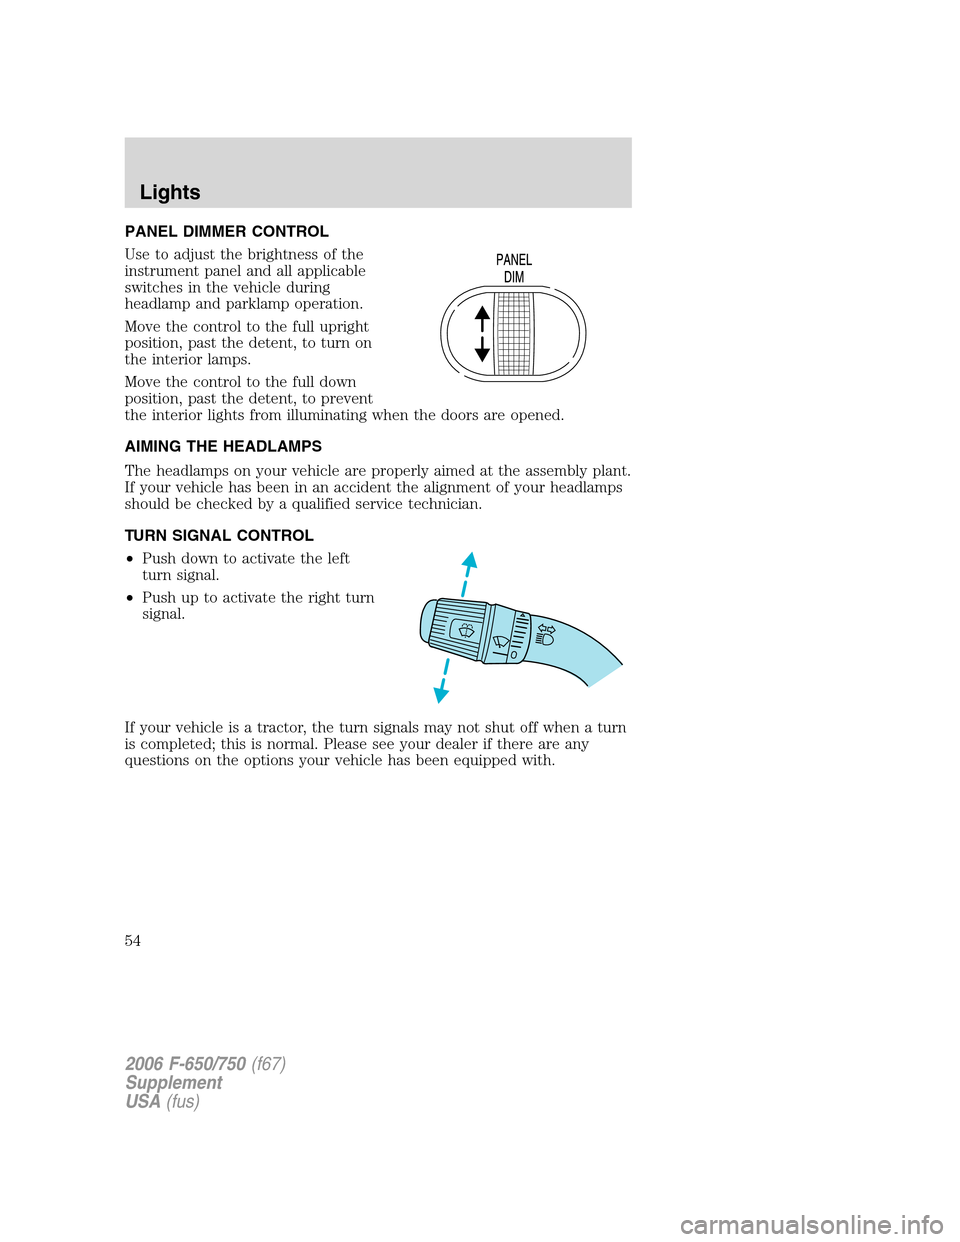 FORD F650 2006 11.G Owners Manual PANEL DIMMER CONTROL
Use to adjust the brightness of the
instrument panel and all applicable
switches in the vehicle during
headlamp and parklamp operation.
Move the control to the full upright
positi